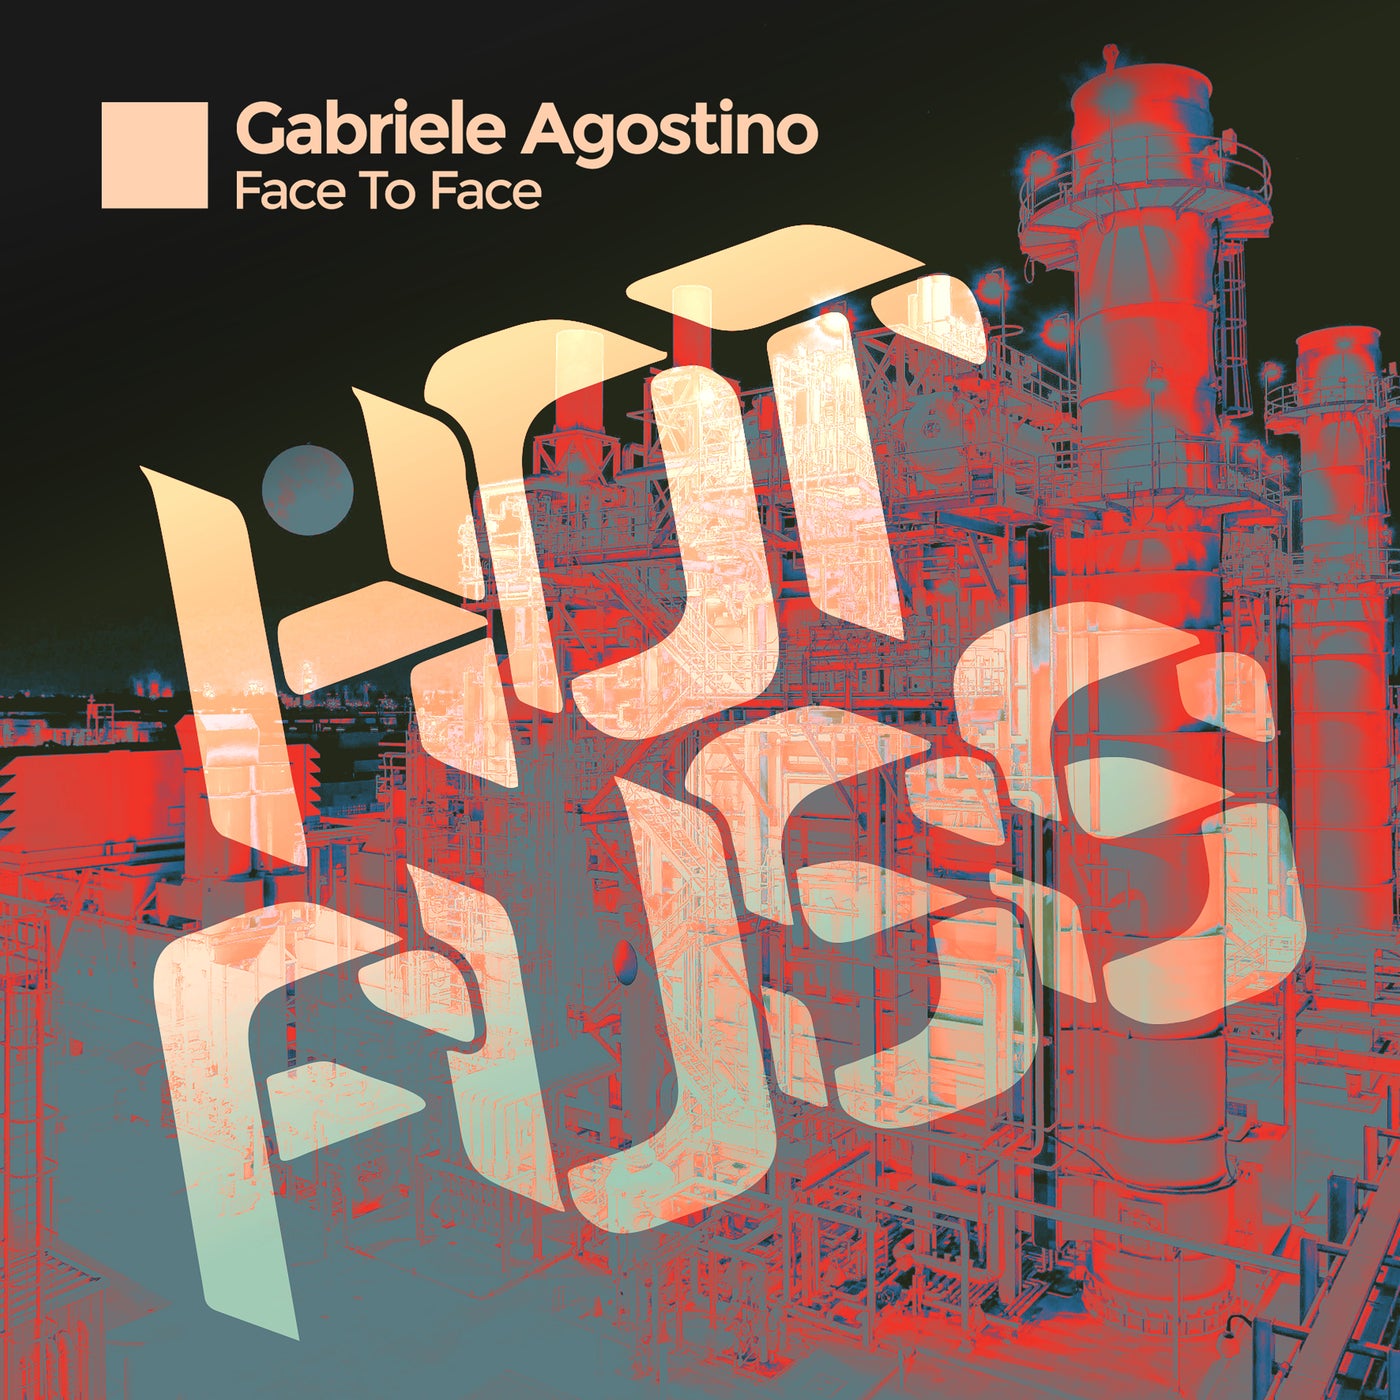 Gabriele Agostino - Face to Face [Hot Fuss]